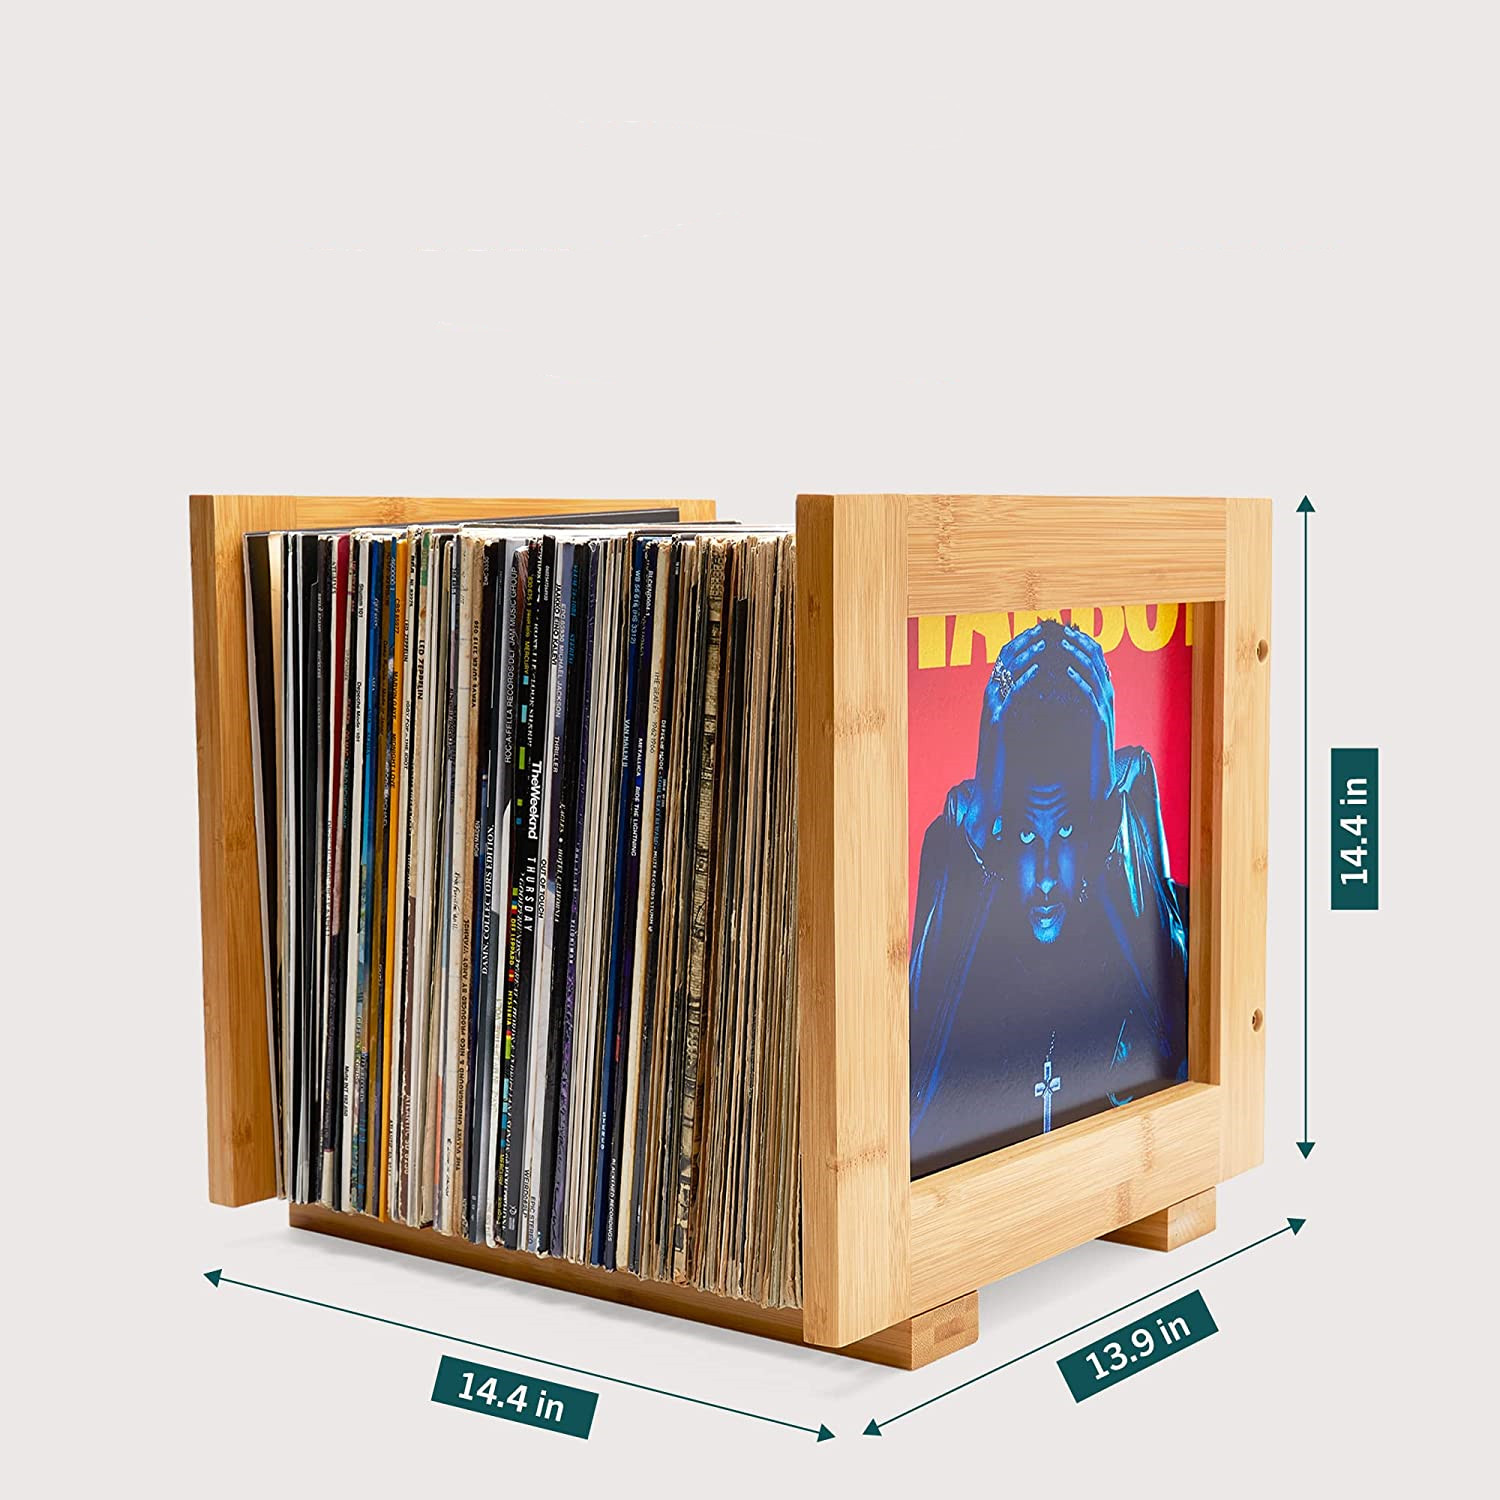 Wooden Vinyl Stand For Record Storage – Retrolife, Inc. All Rights Reserved.